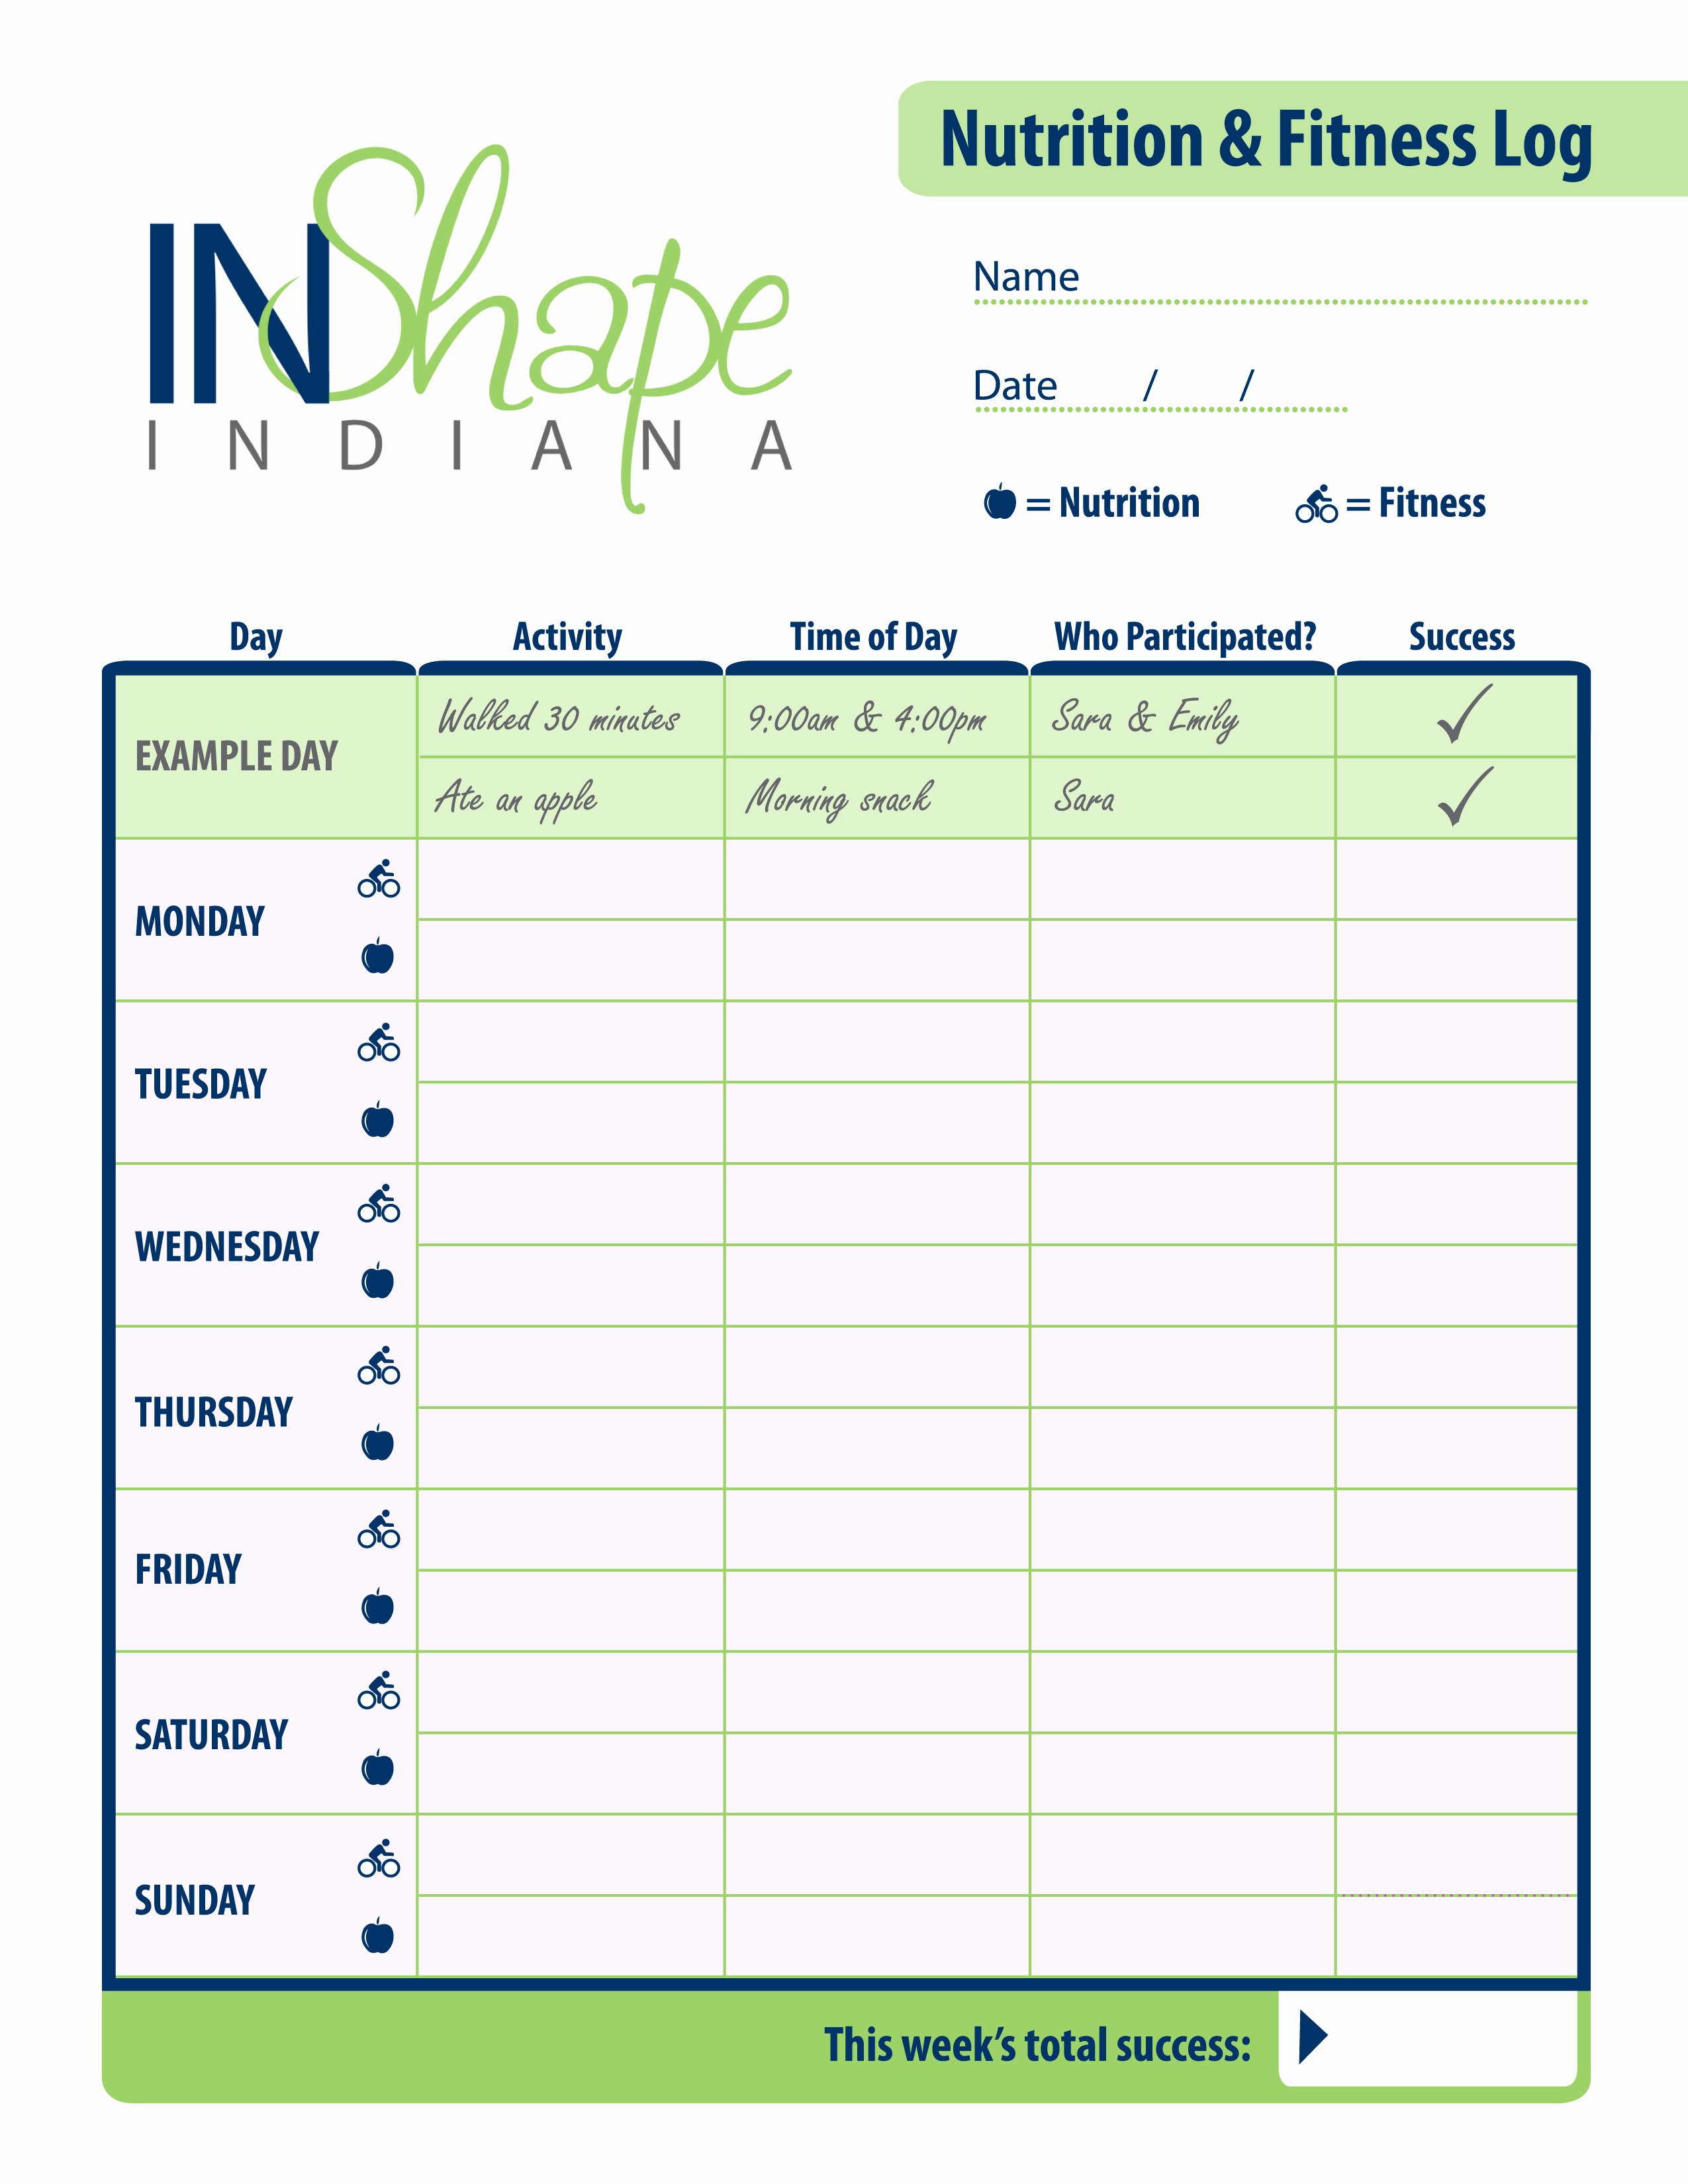 Food and Activity Log Inspirational isp Crossfit Nutrition Log